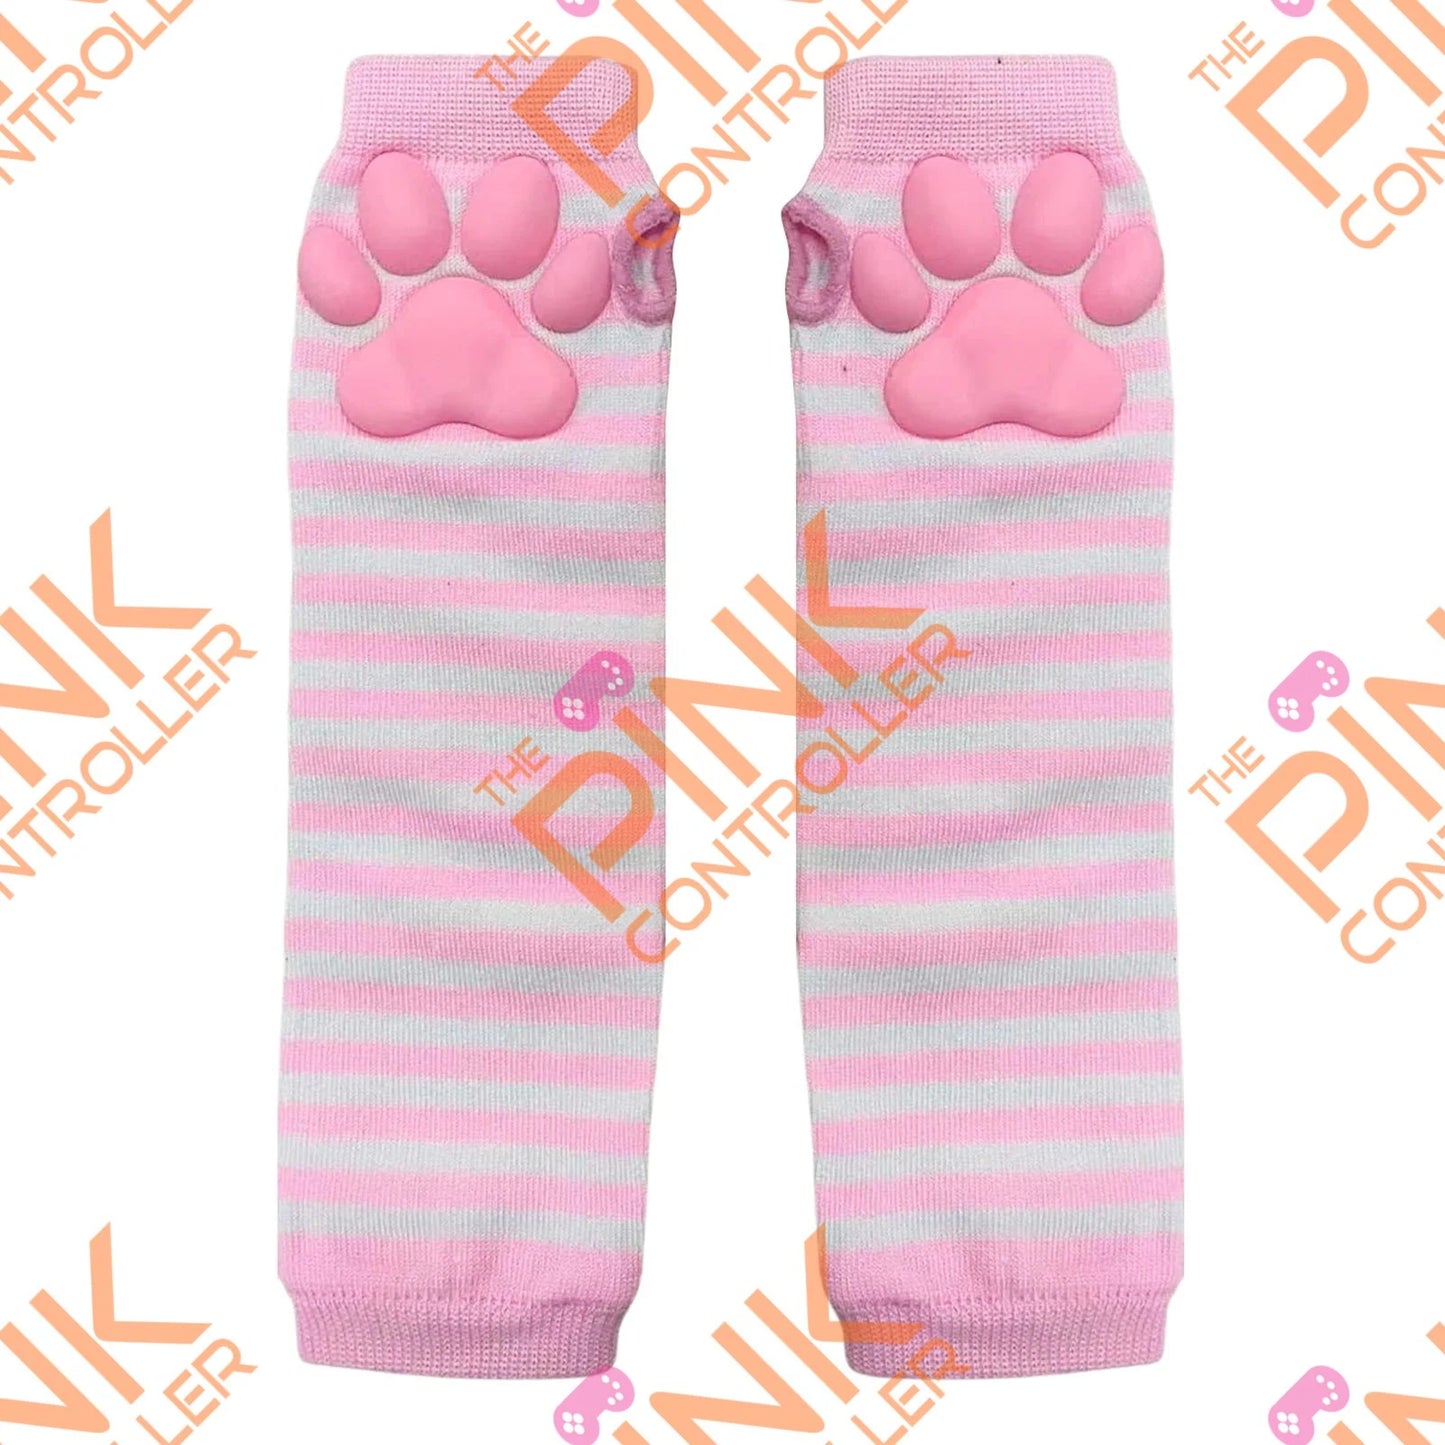 Kawaii Paw Gloves (long)  w/Silicone Grips